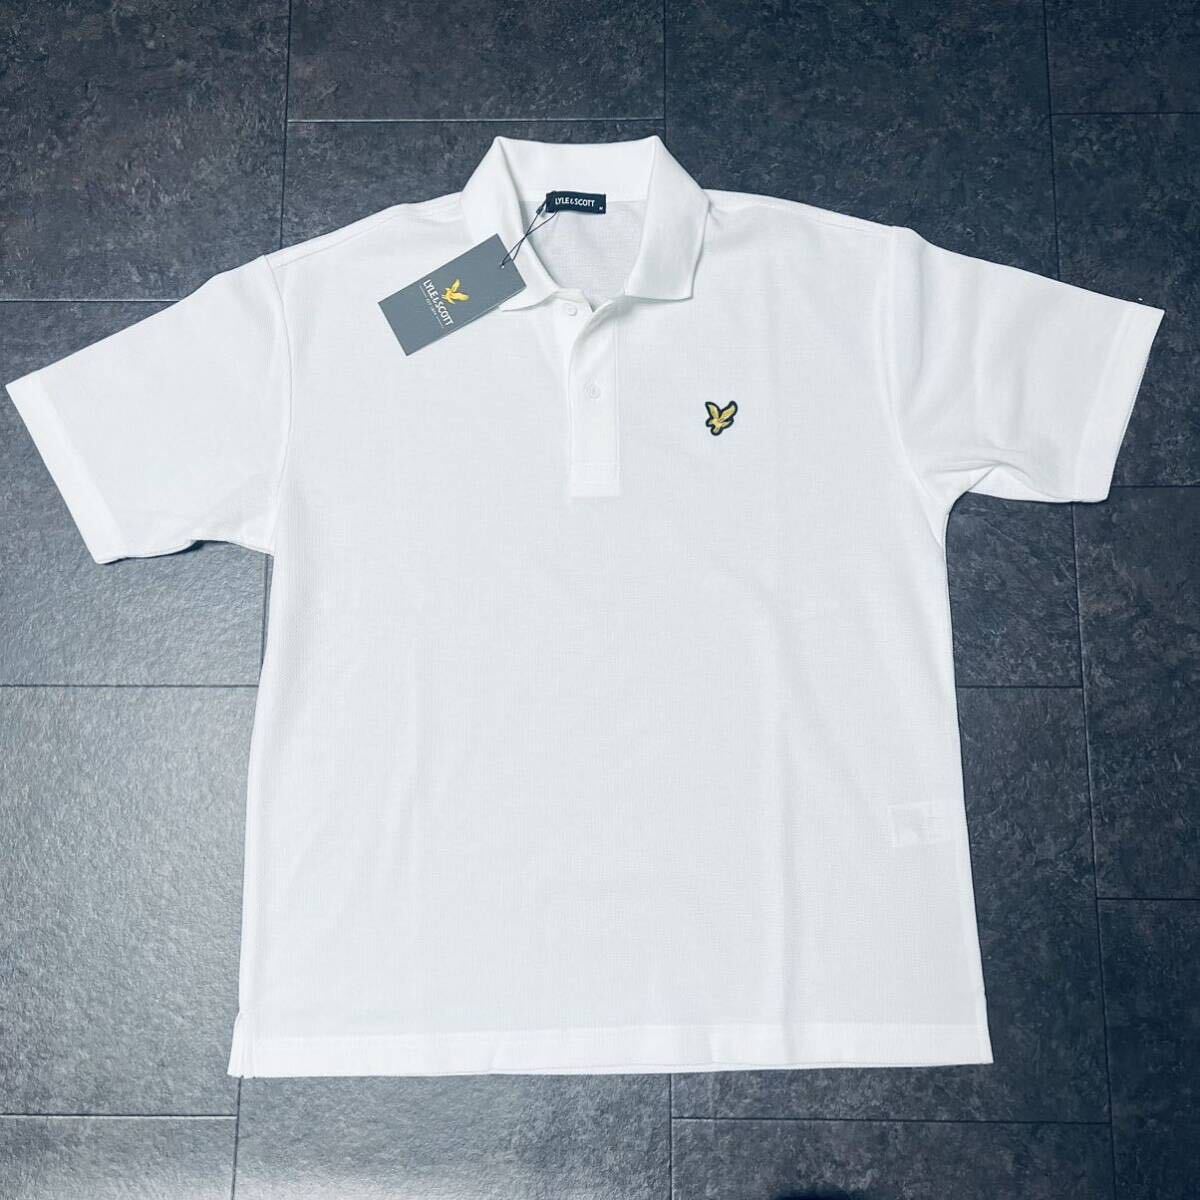 L size free shipping la il and Scott polo-shirt with short sleeves men's new goods one Point badge spring summer thin white Golf ventilation eminent 